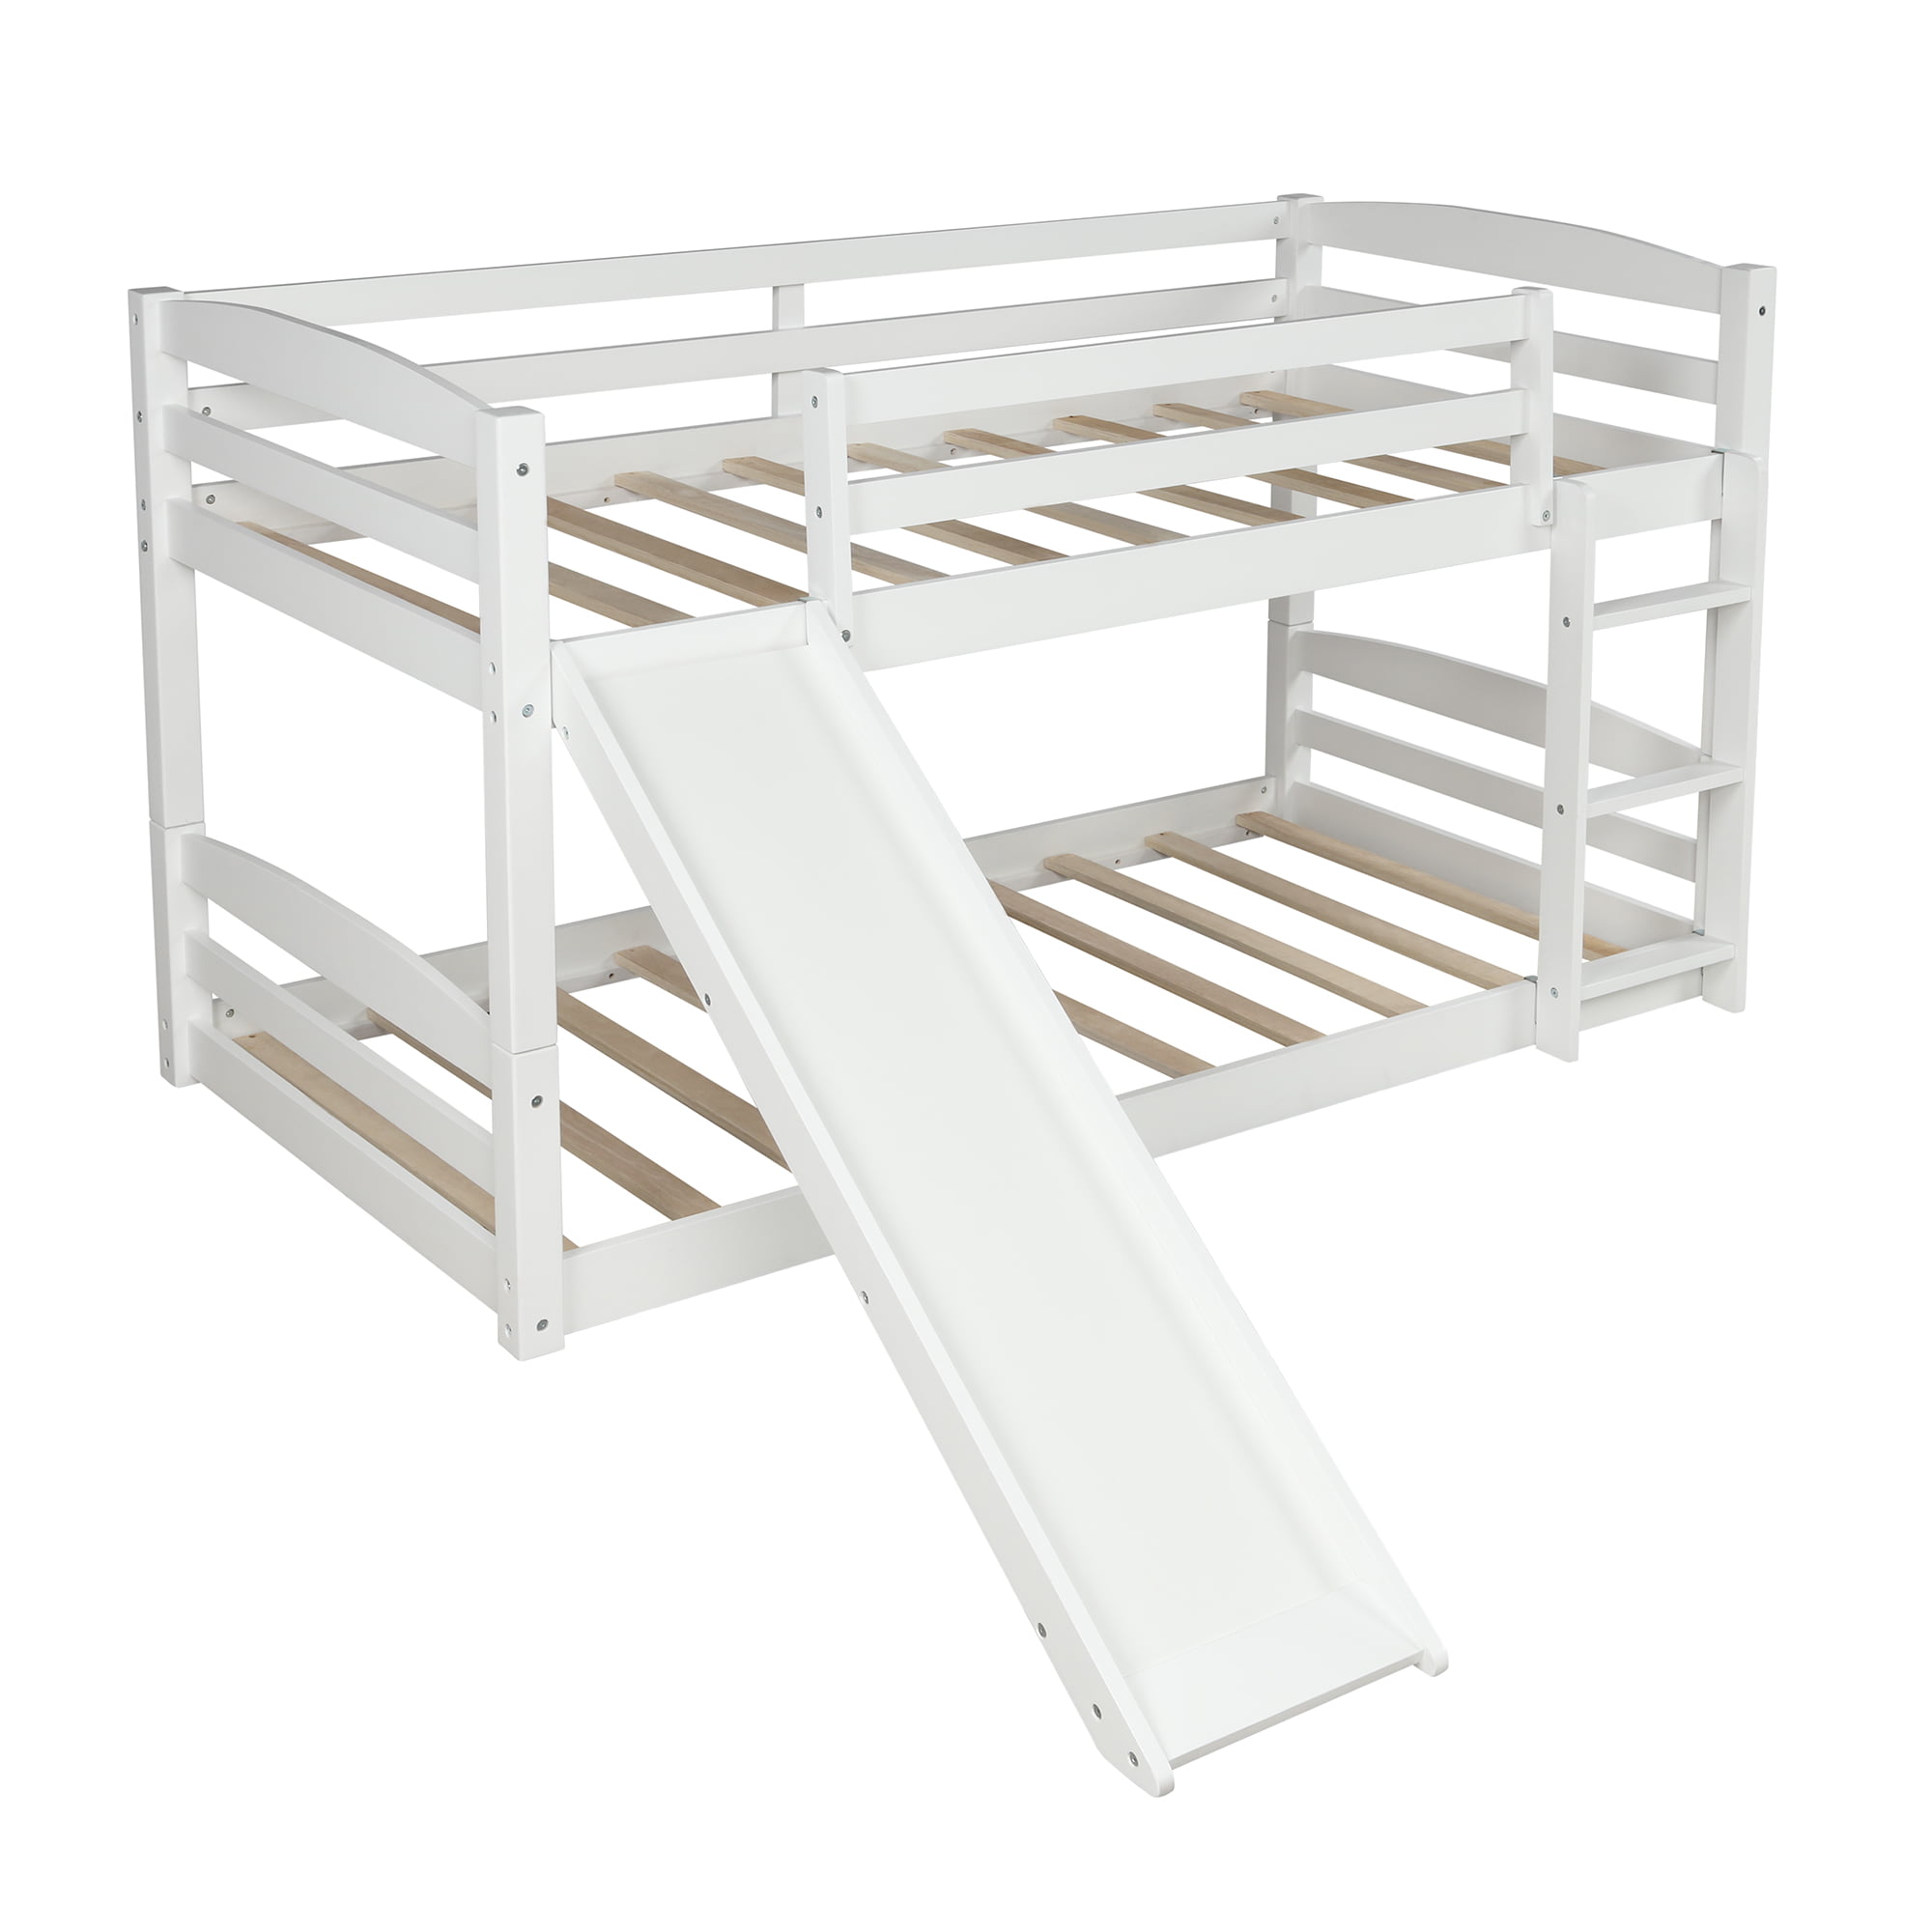 Twin Over Low Bunk Bed With Slide, Bunk Bed Ladder Only